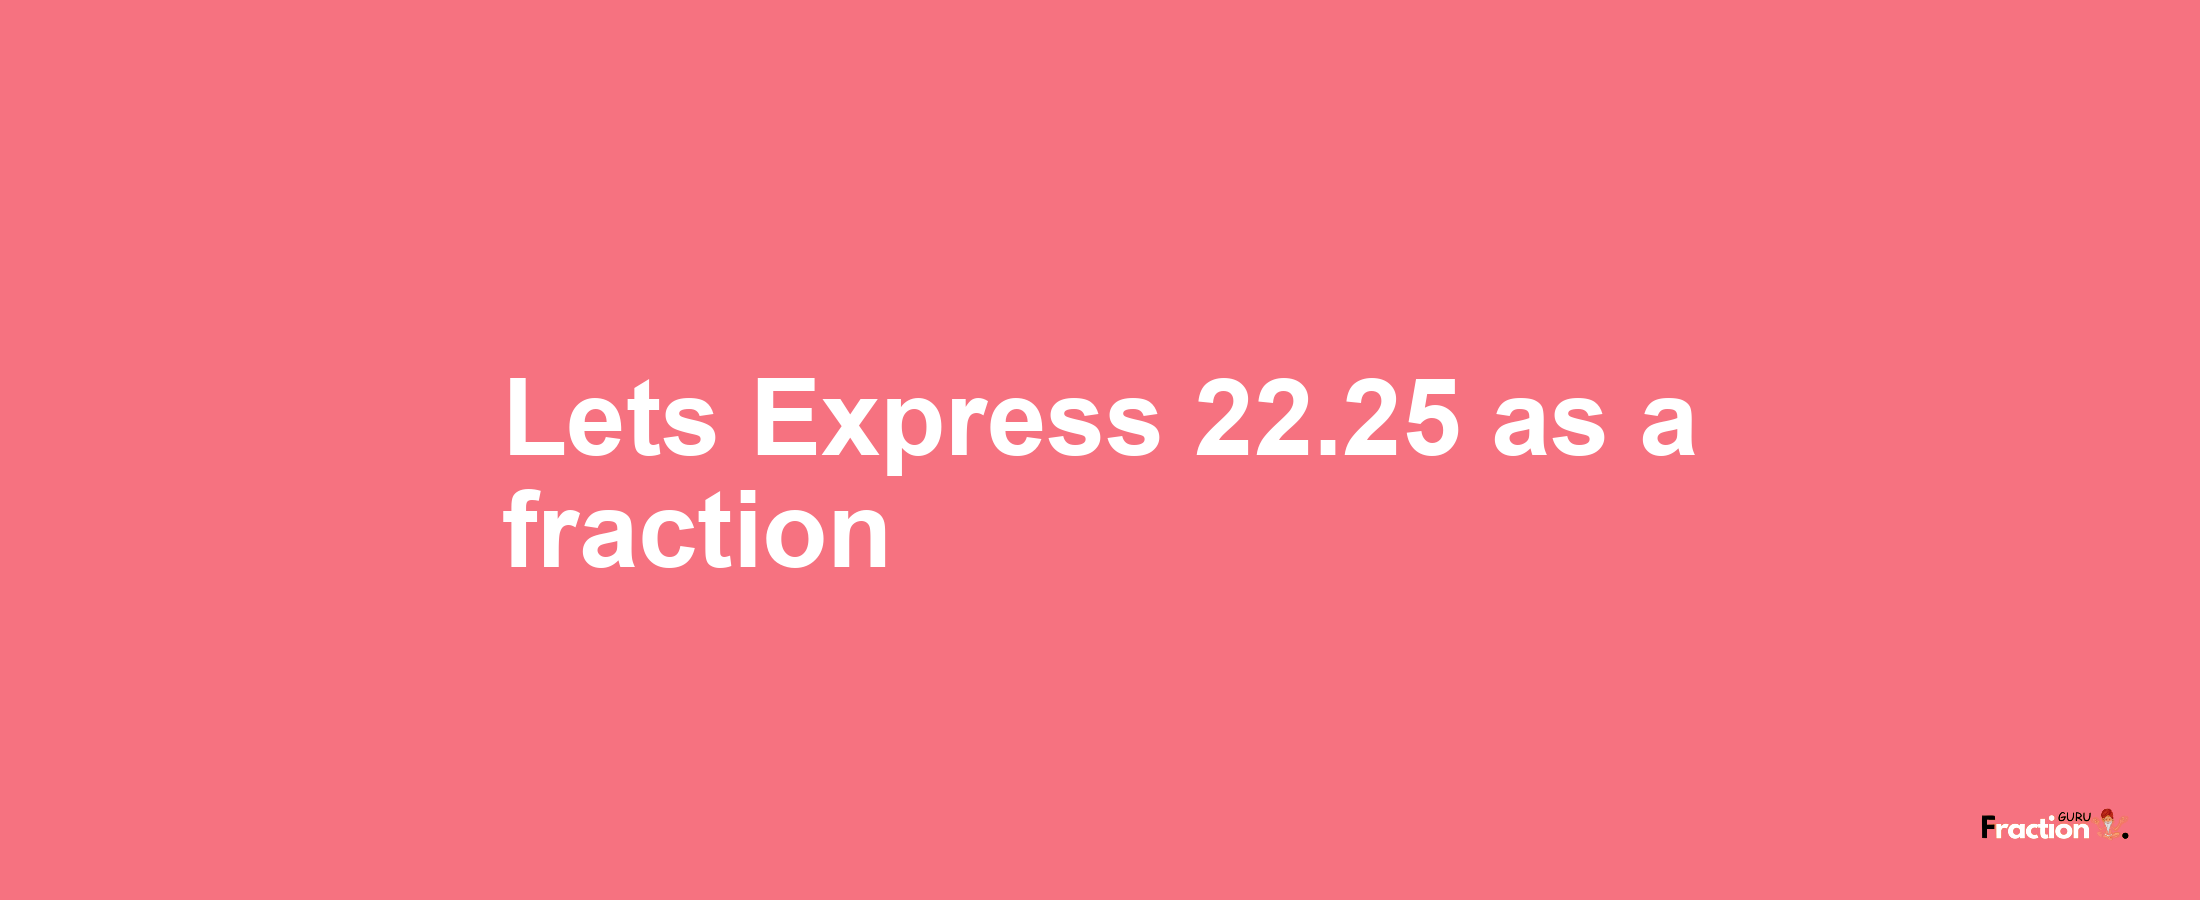 Lets Express 22.25 as afraction